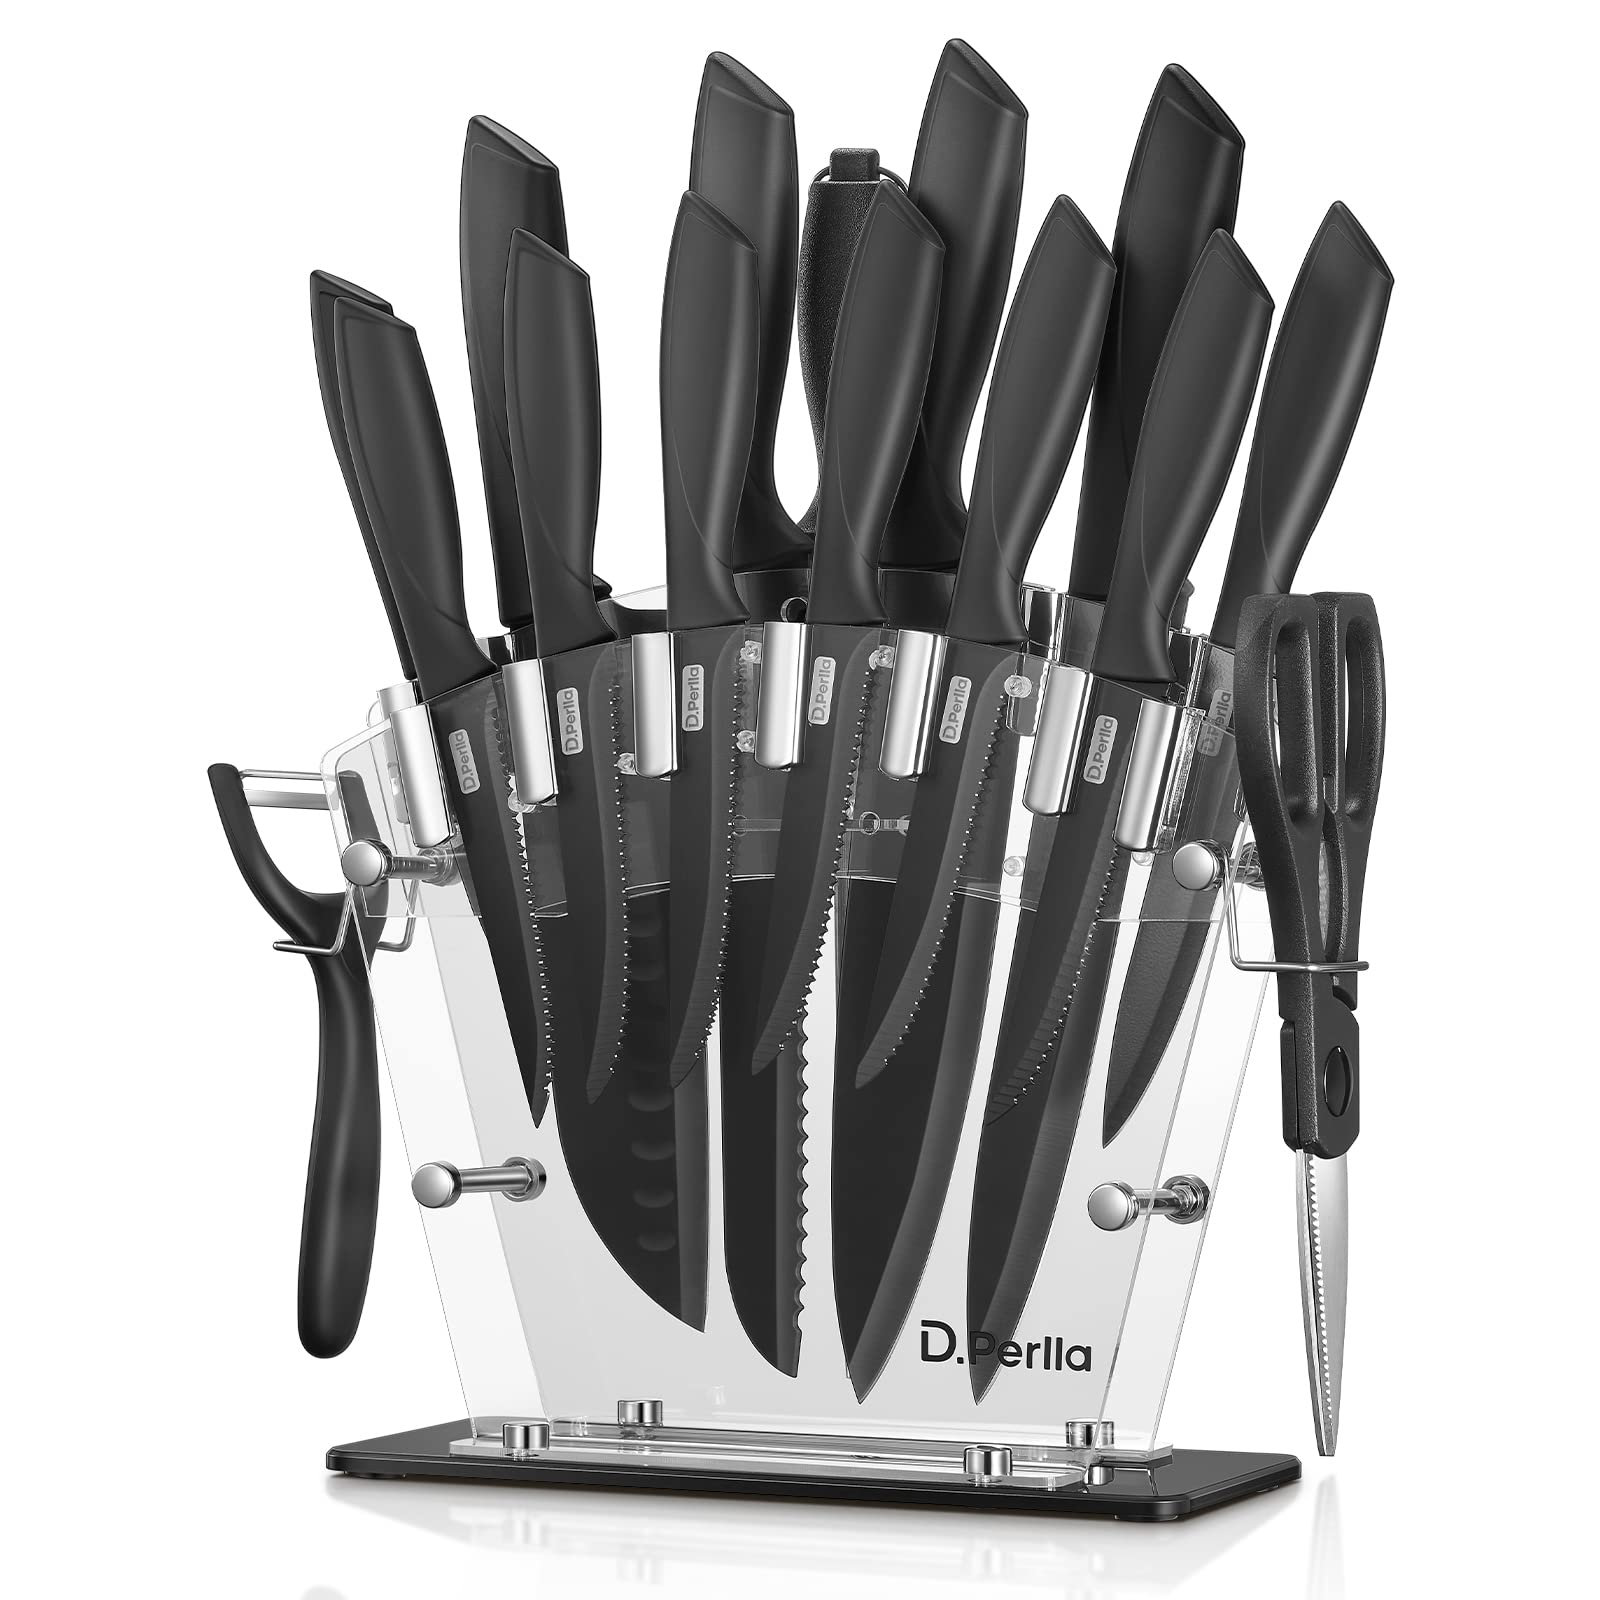 PrinChef Knife Set, 19 Pcs Rust Proof Knives Set for Kitchen, with Acrylic Stand, Sharpener, Scissors and Peeler, Stainless Steel Knife Sets with